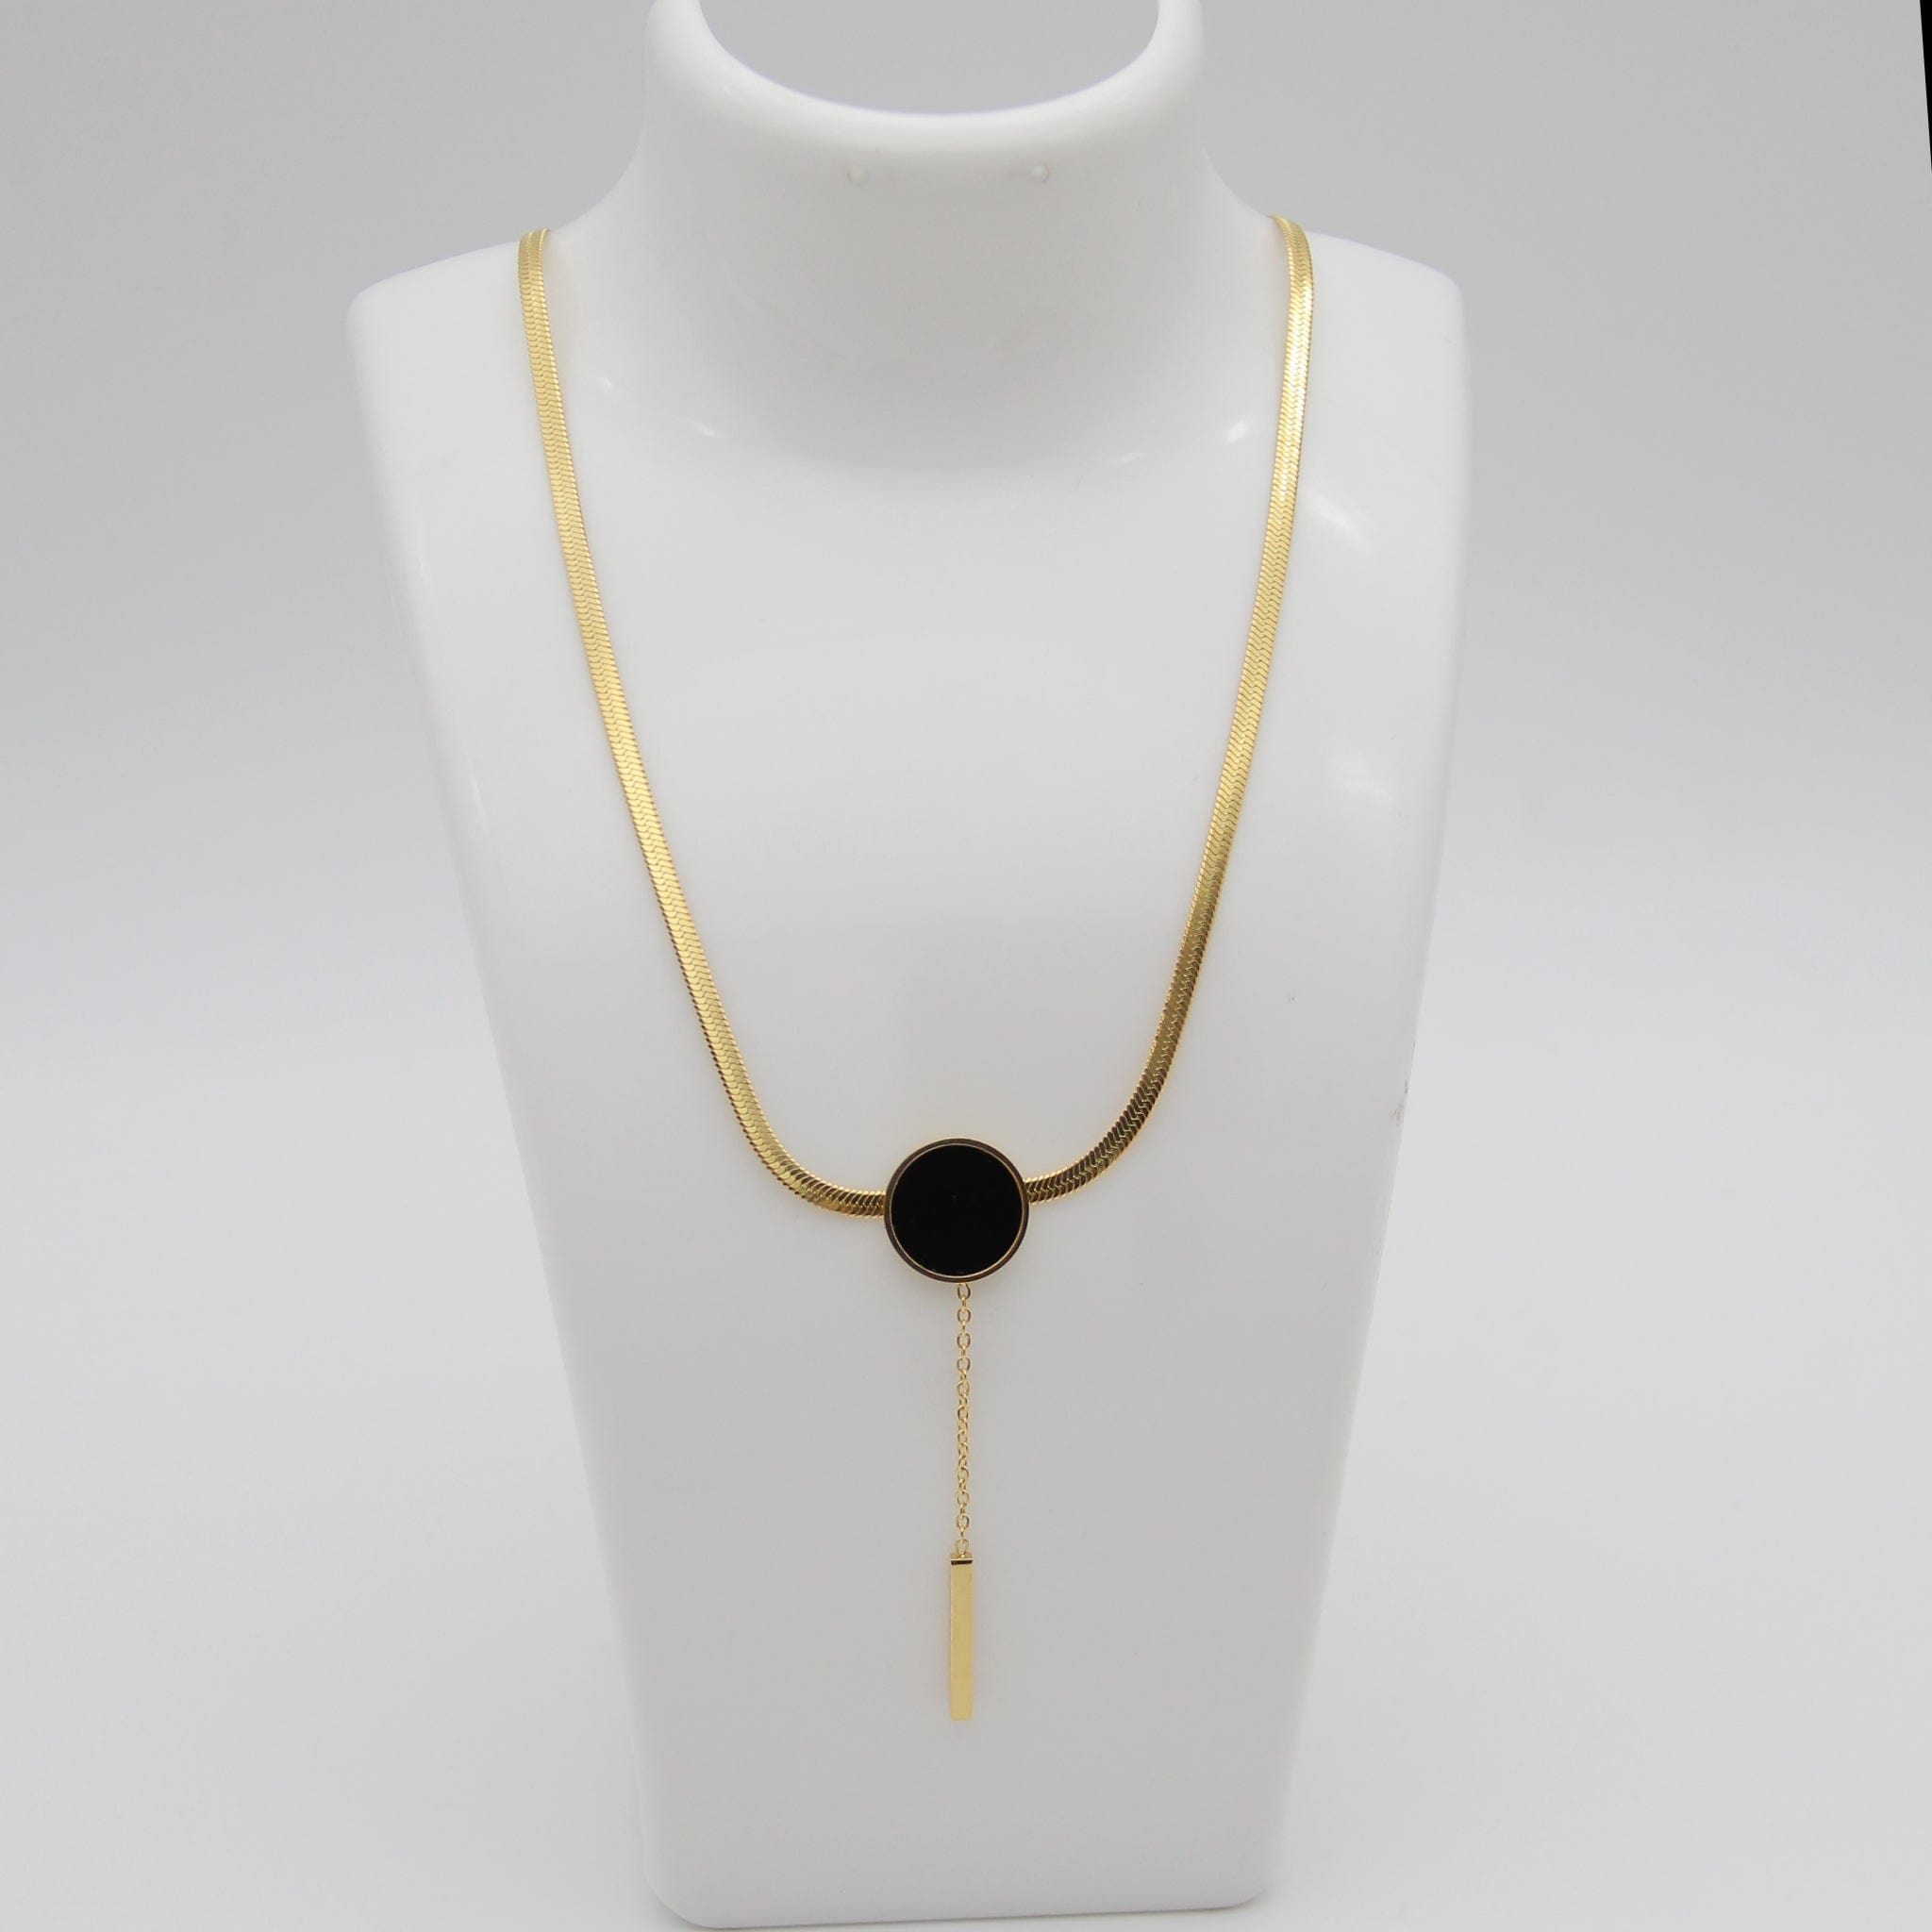 Outlet W&B Female Necklaces Pharaonic Black Circle Golden Stainless Steel Necklace